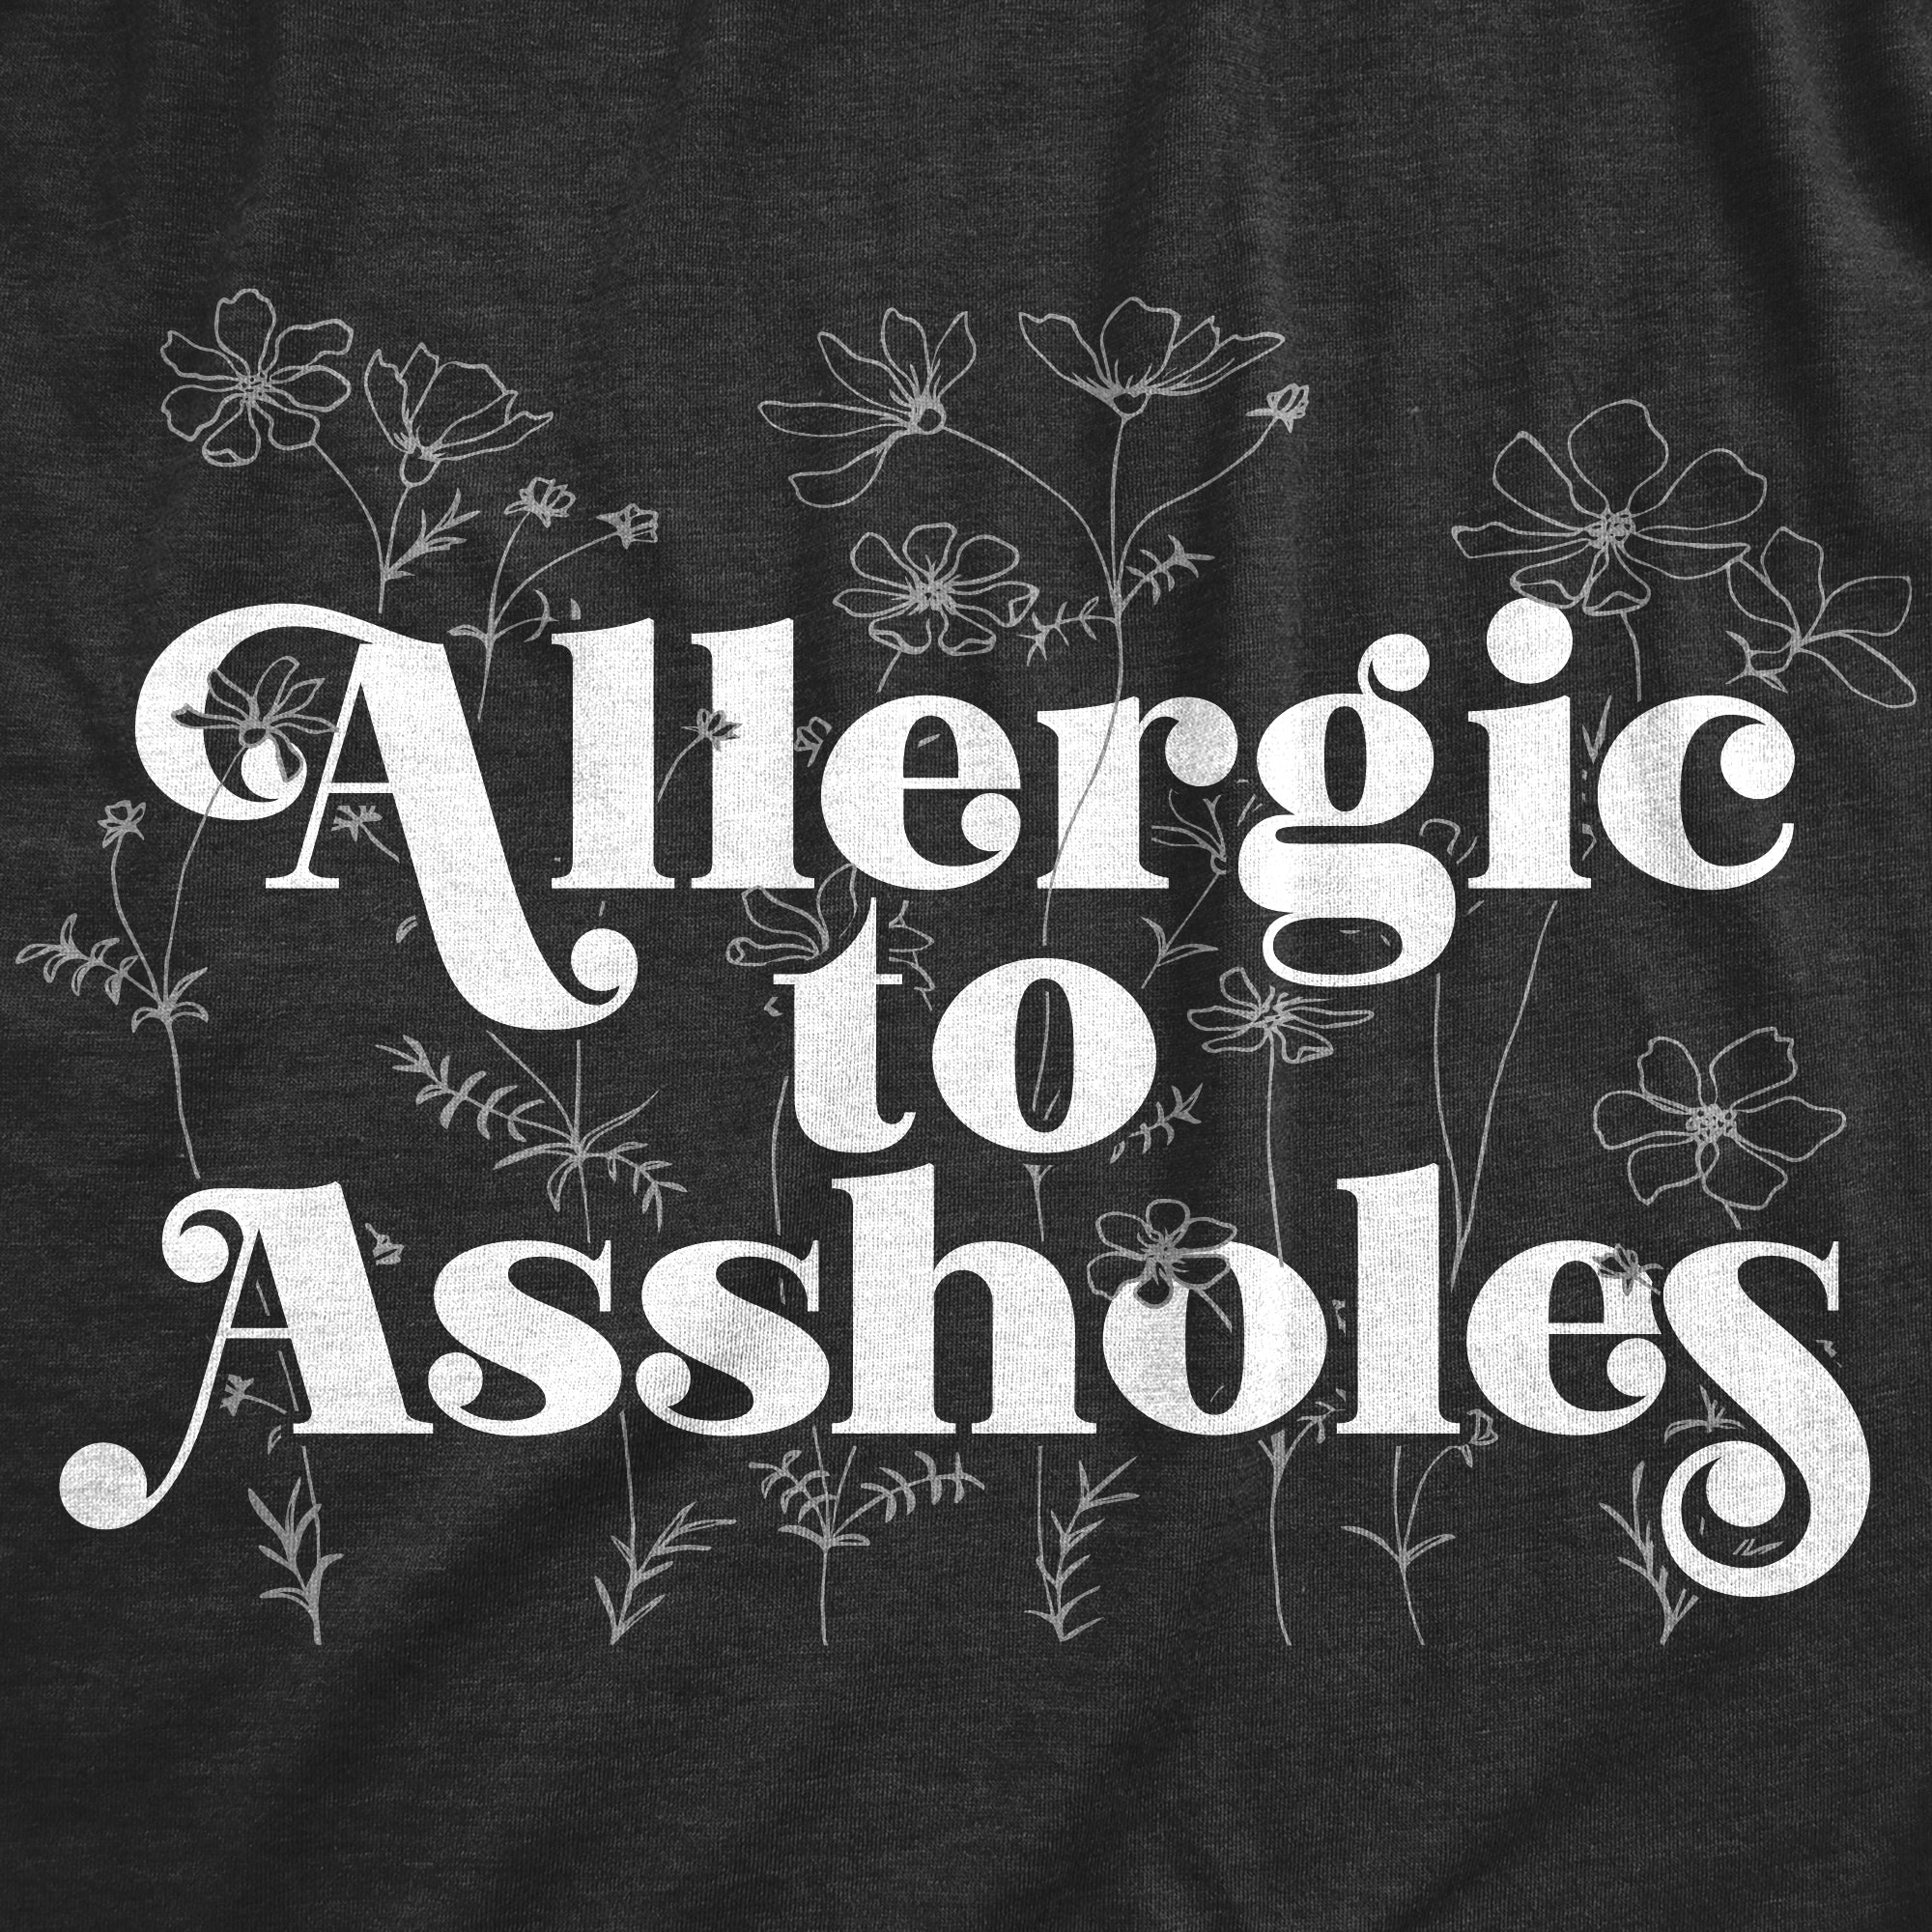 Funny Heather Black Allergic To Assholes Mens T Shirt Nerdy Sarcastic toilet Tee